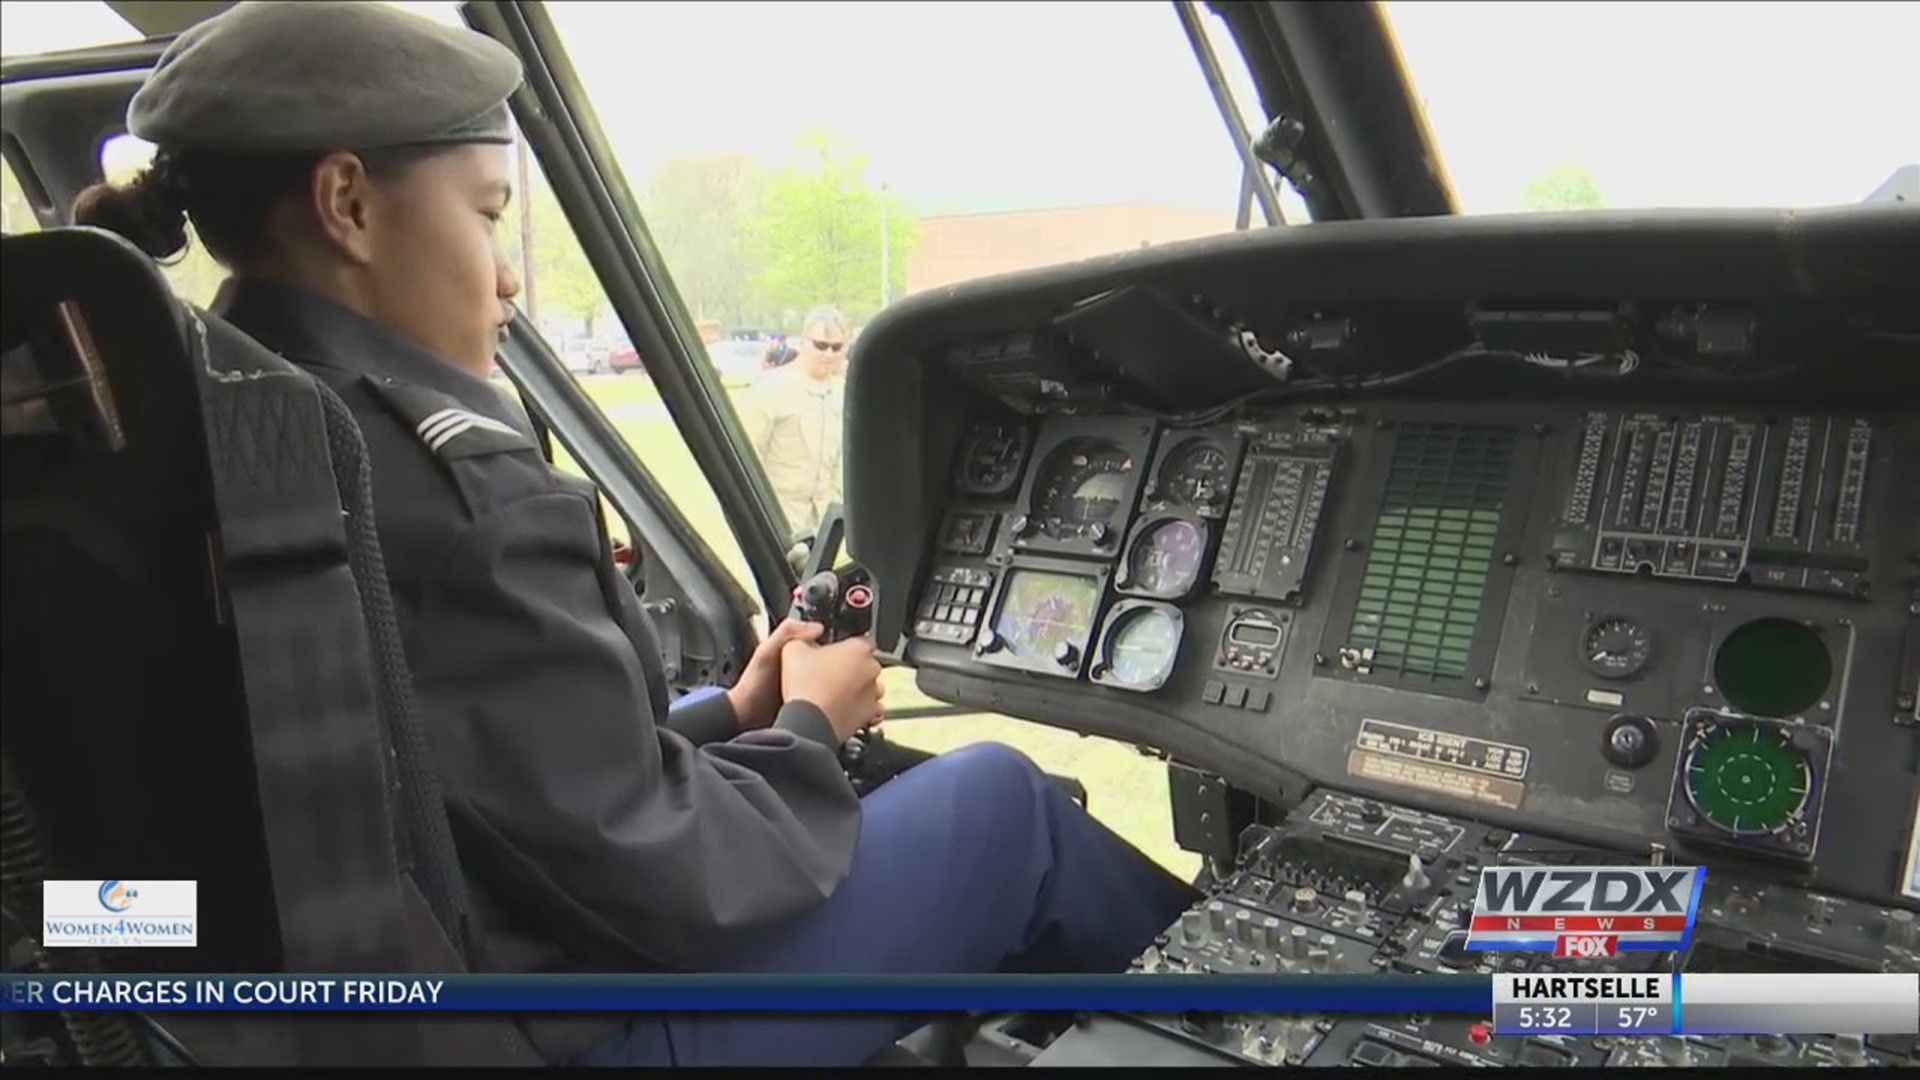 The Air Force is reportedly 25% short of the fighter pilots they need and has struggled with the shortfall for years. Find out what's being done locally to help fill those seats.